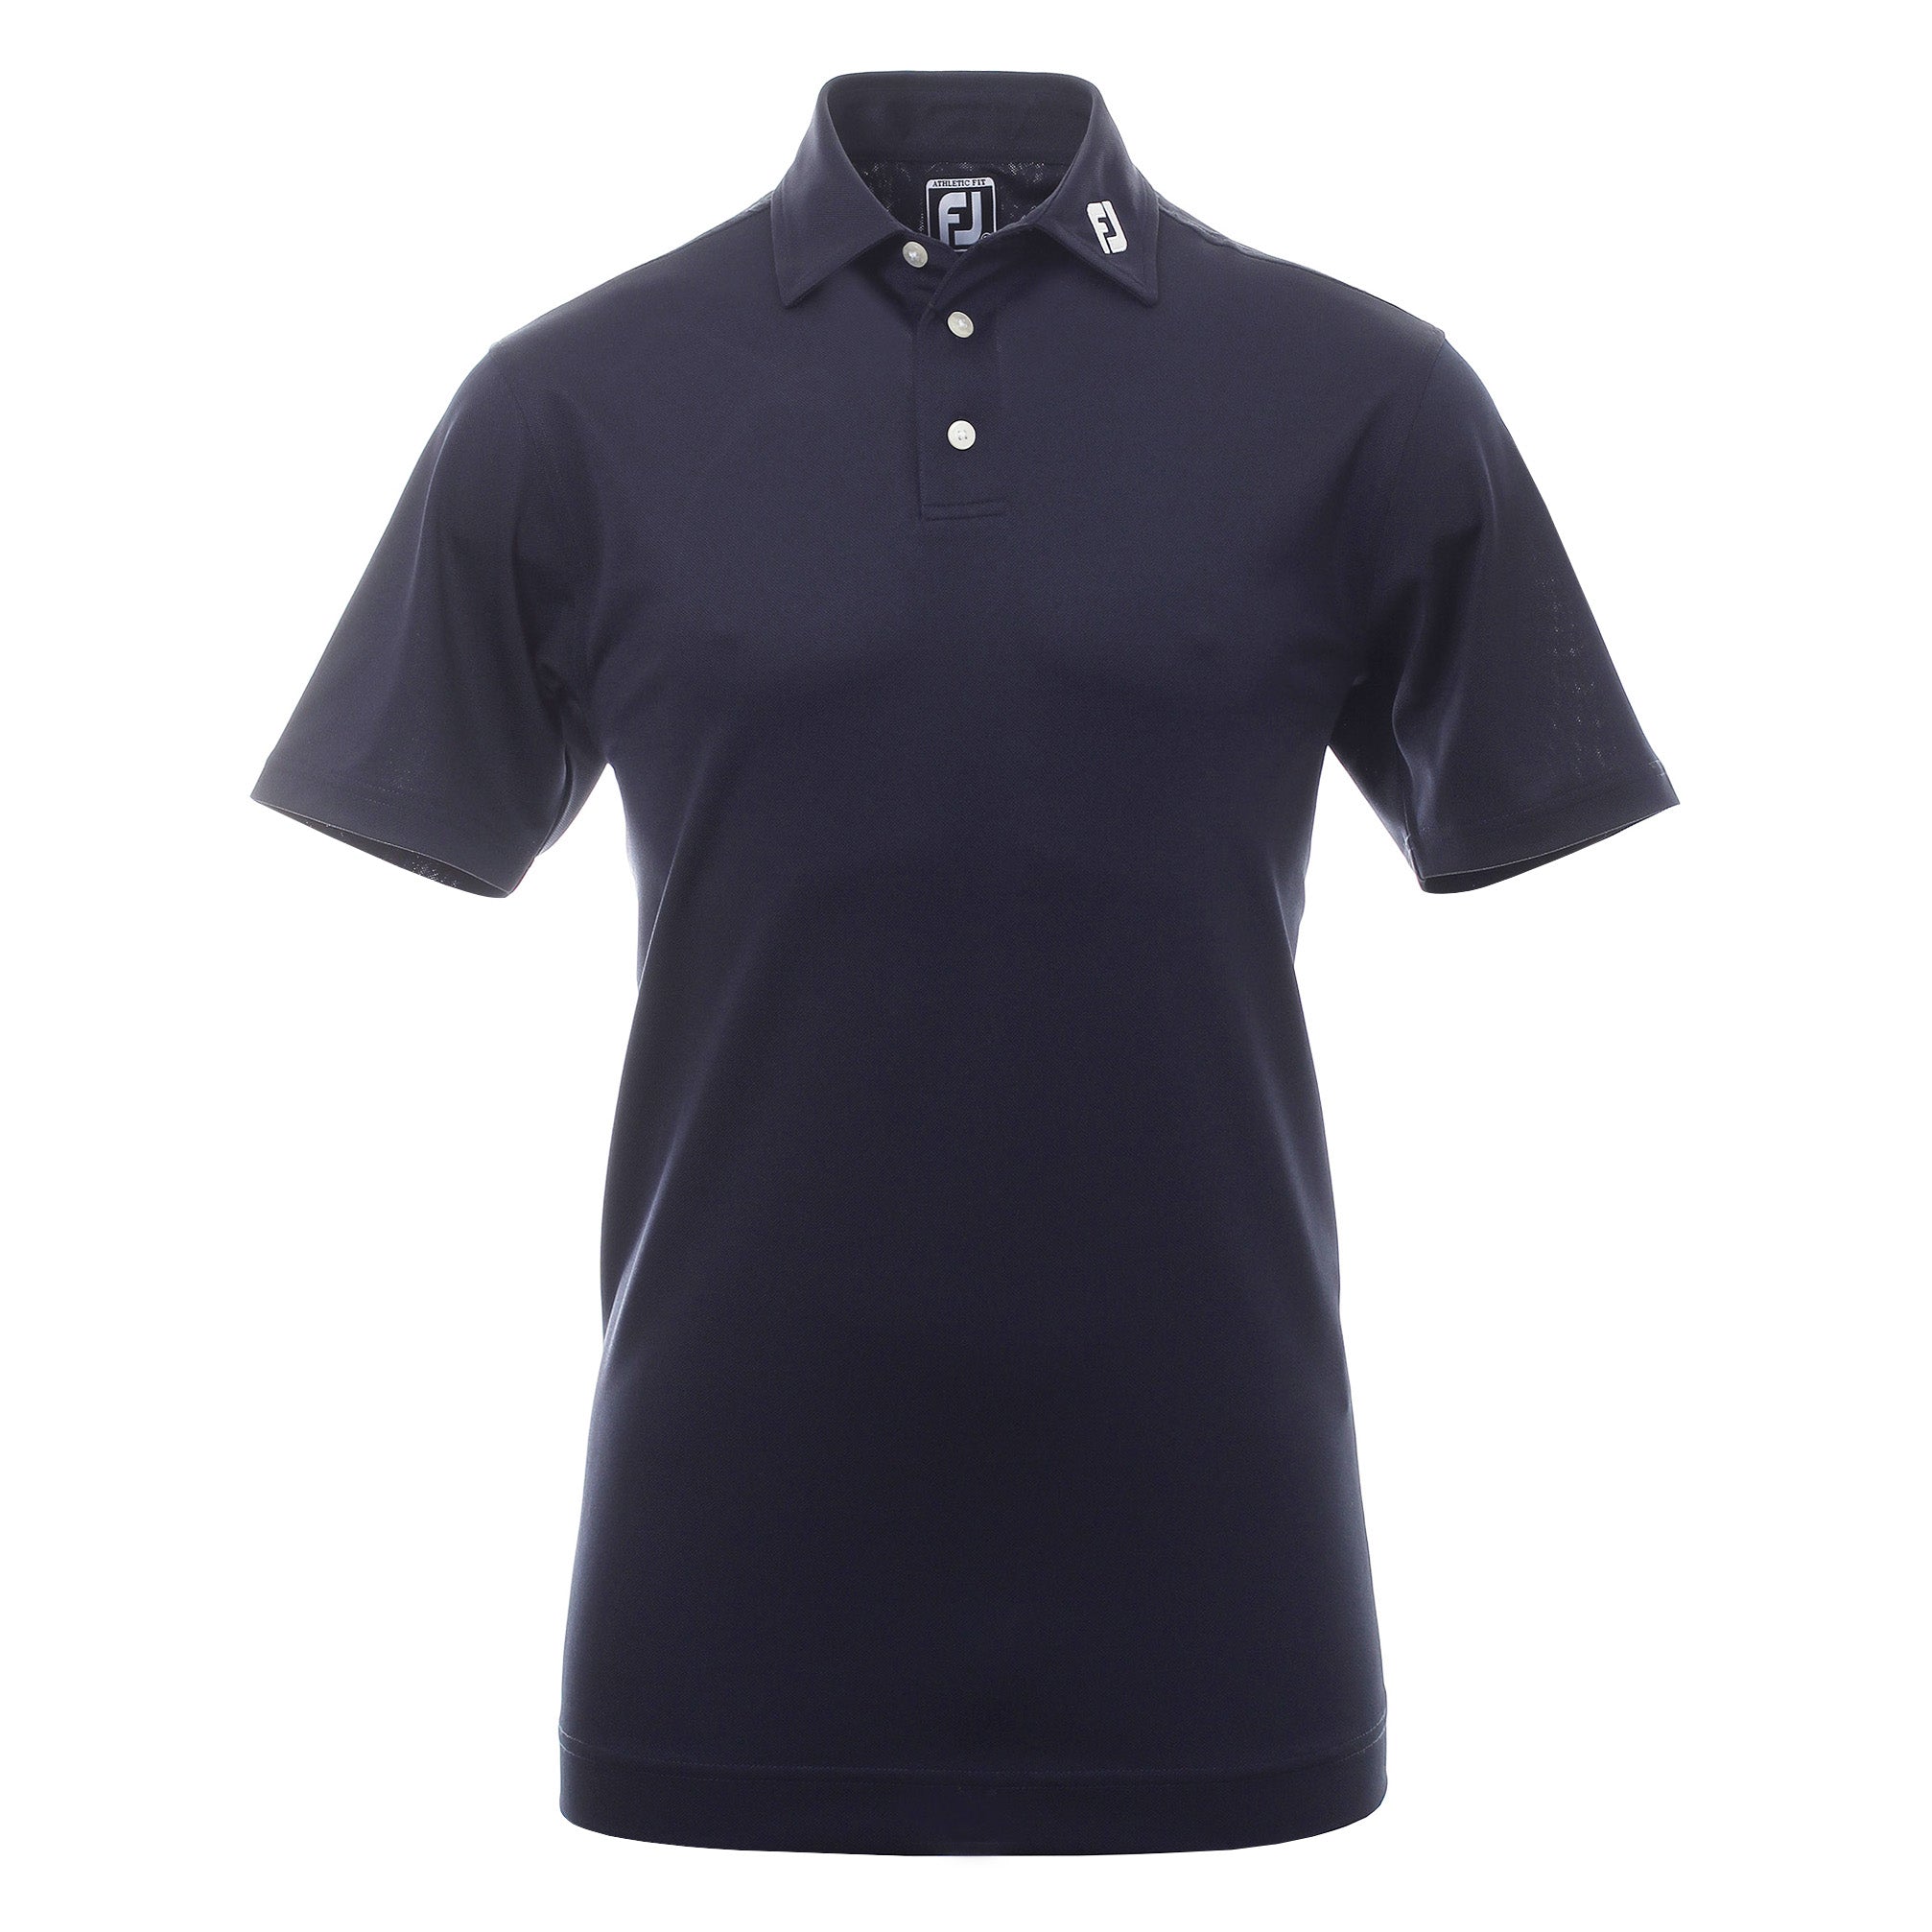 FootJoy Stretch Pique Solid Golf Shirt 91824 Navy | Function18